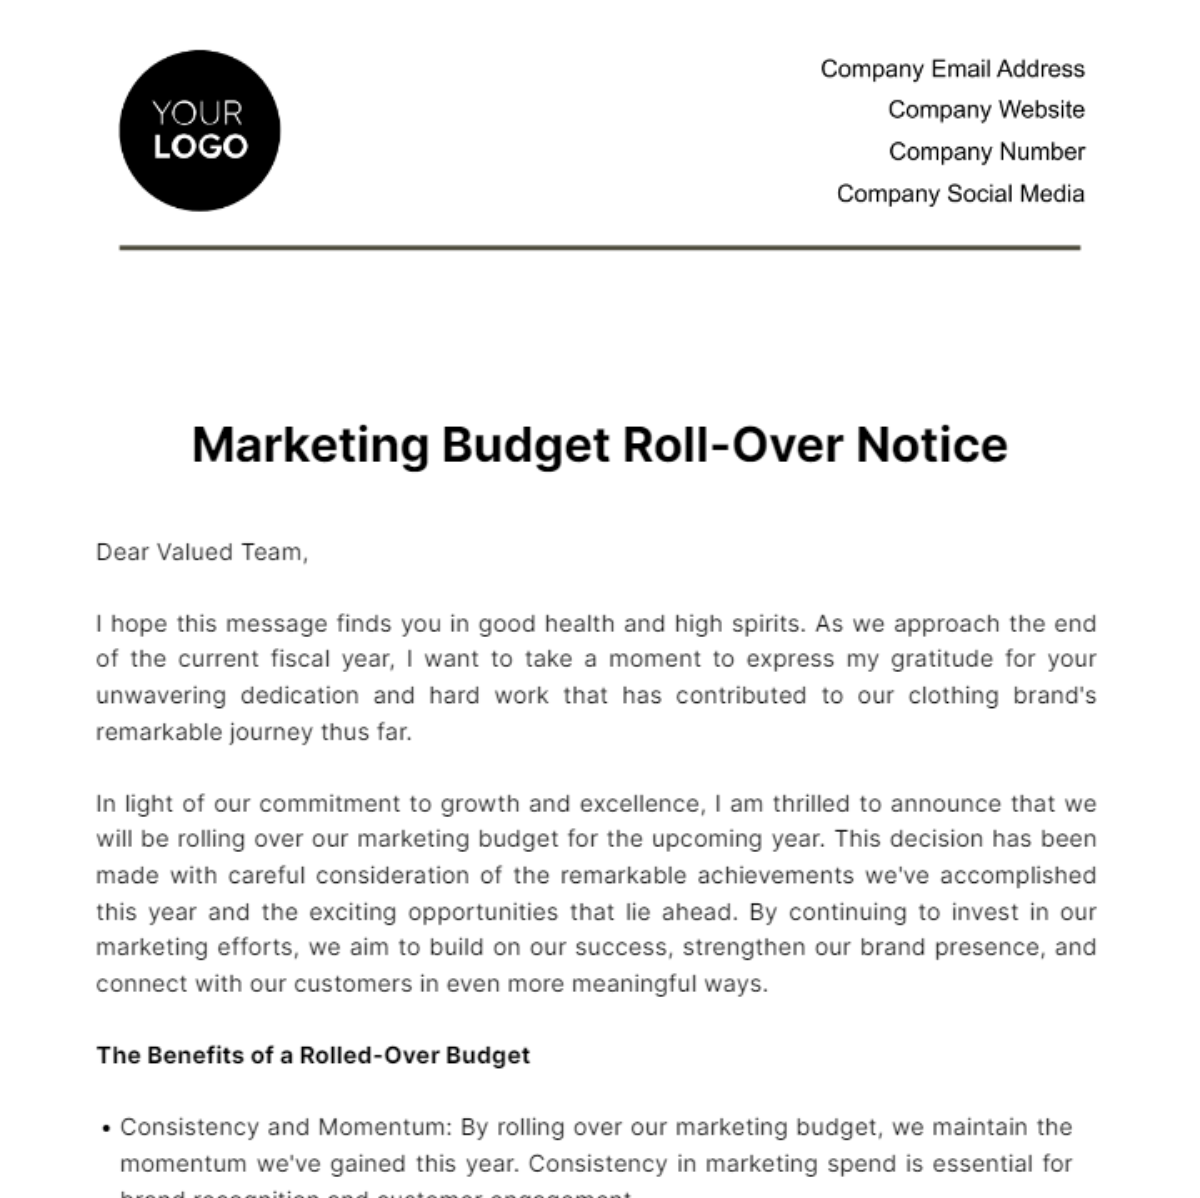 Free Marketing Budget Roll-over Notice Template